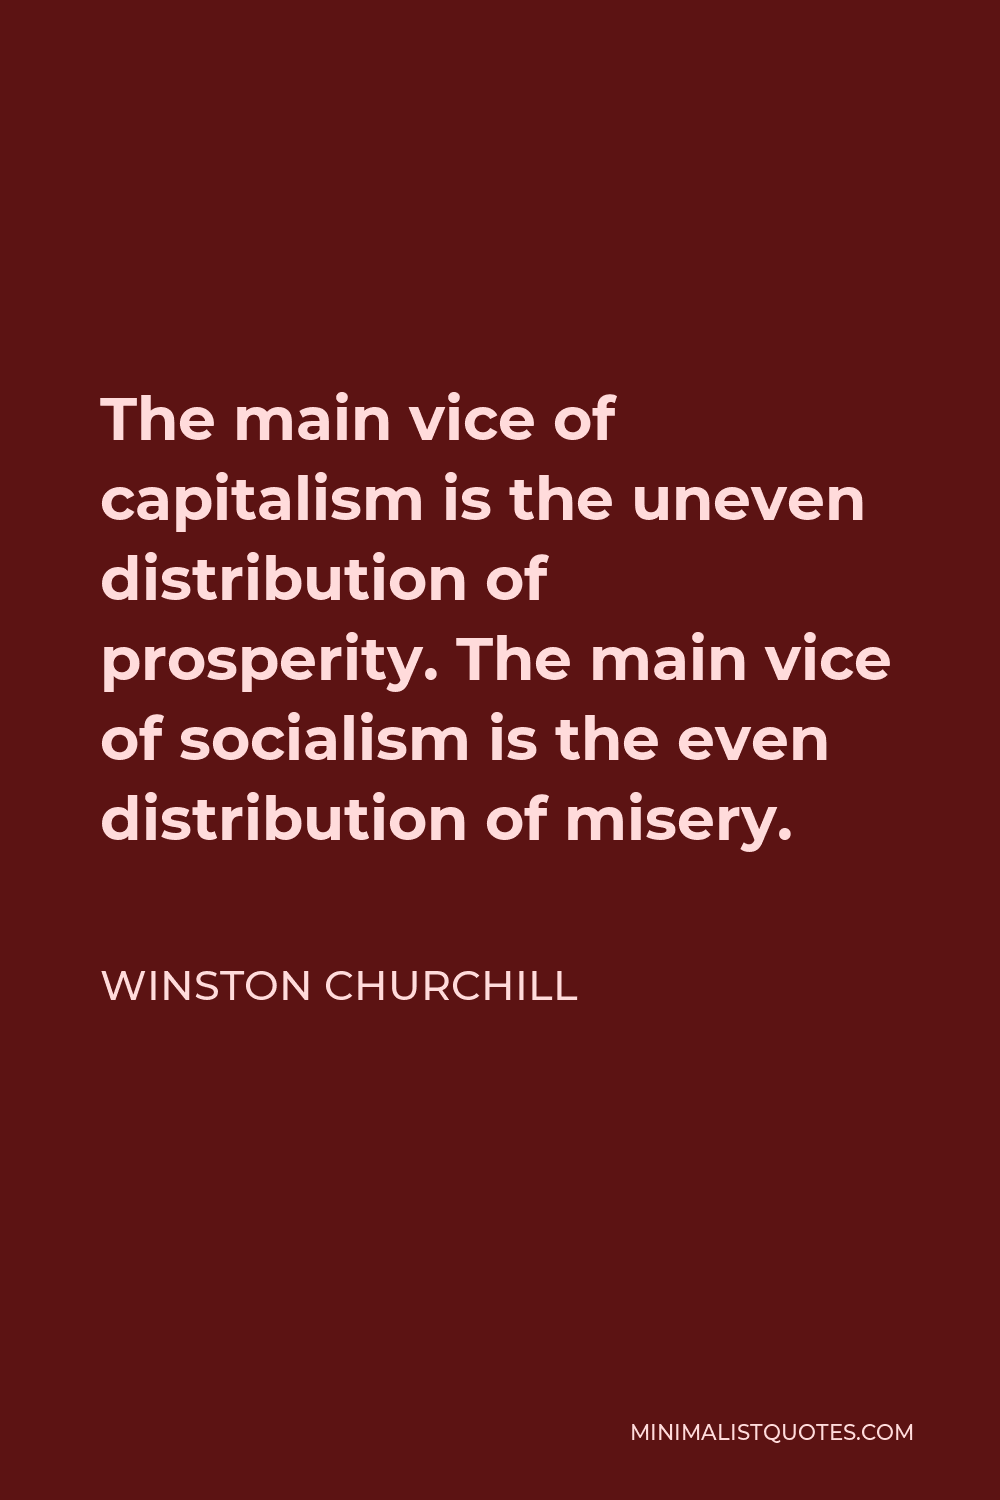 Winston Churchill Quote - The main vice of capitalism is the uneven distribution of prosperity. The main vice of socialism is the even distribution of misery.